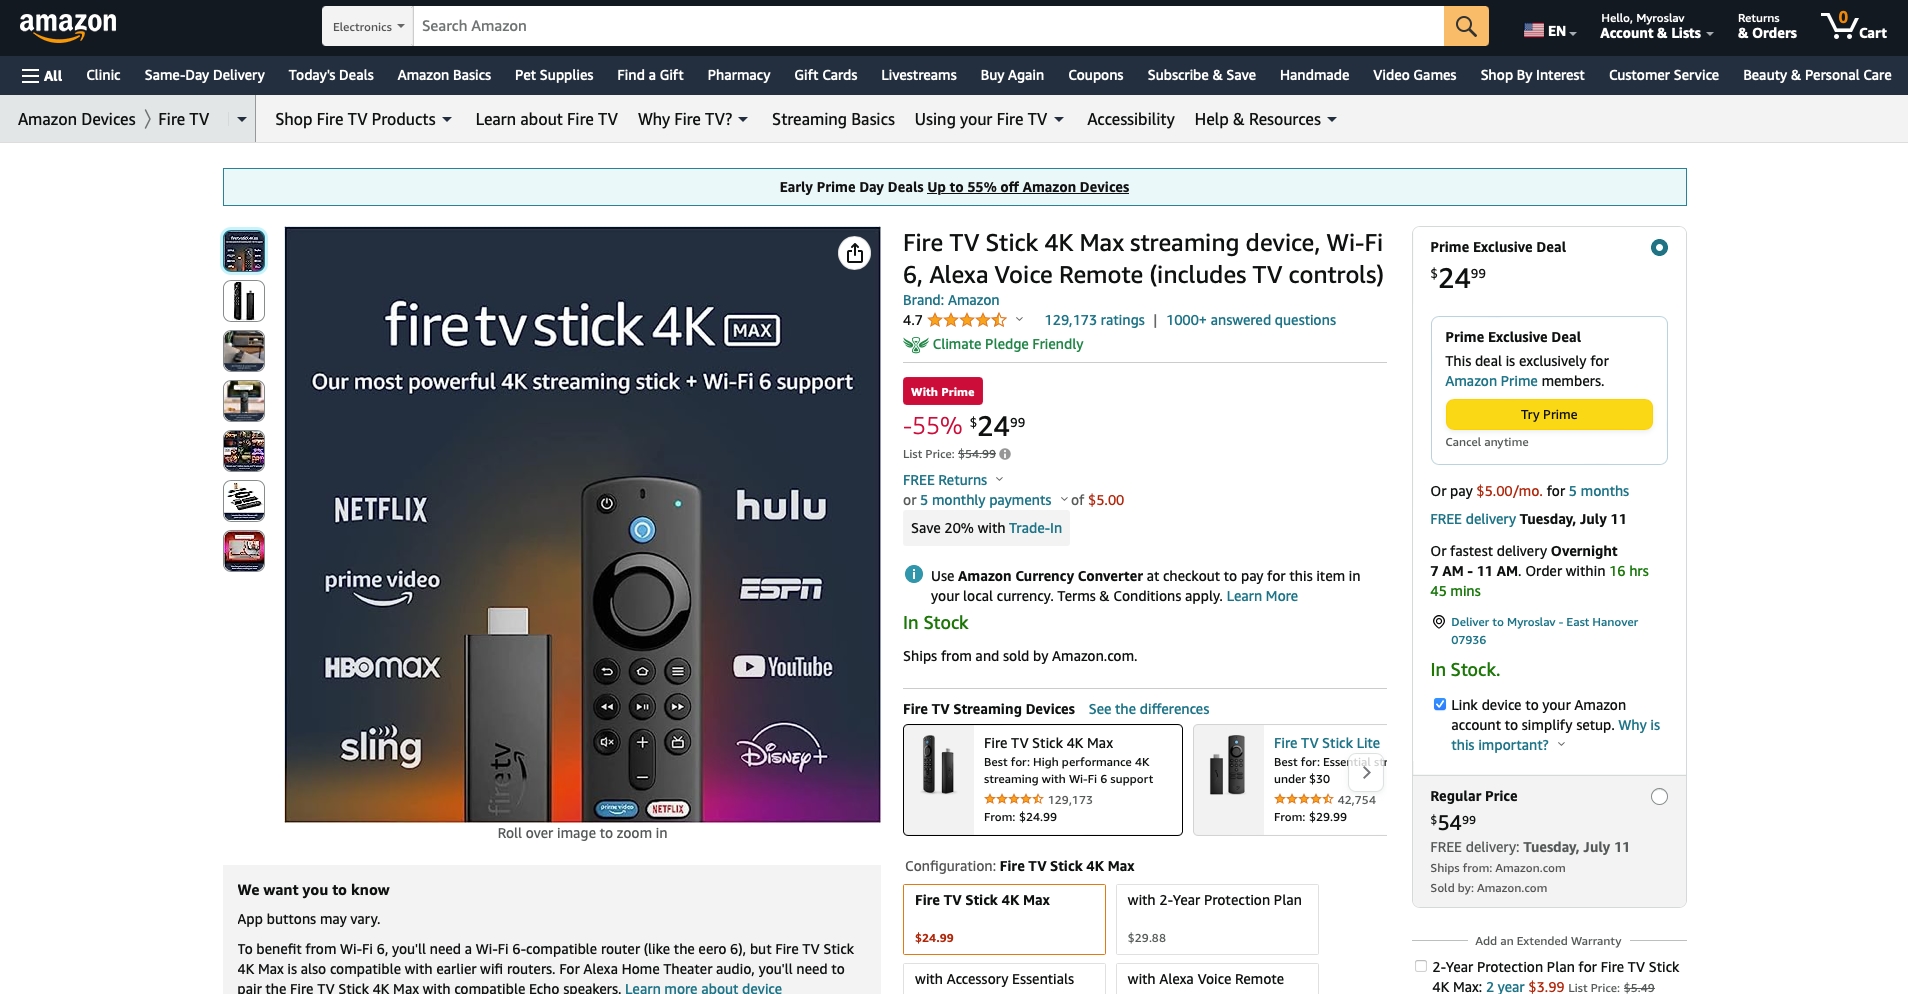 Fire TV Stick 4K with 2-Year Protection Plan